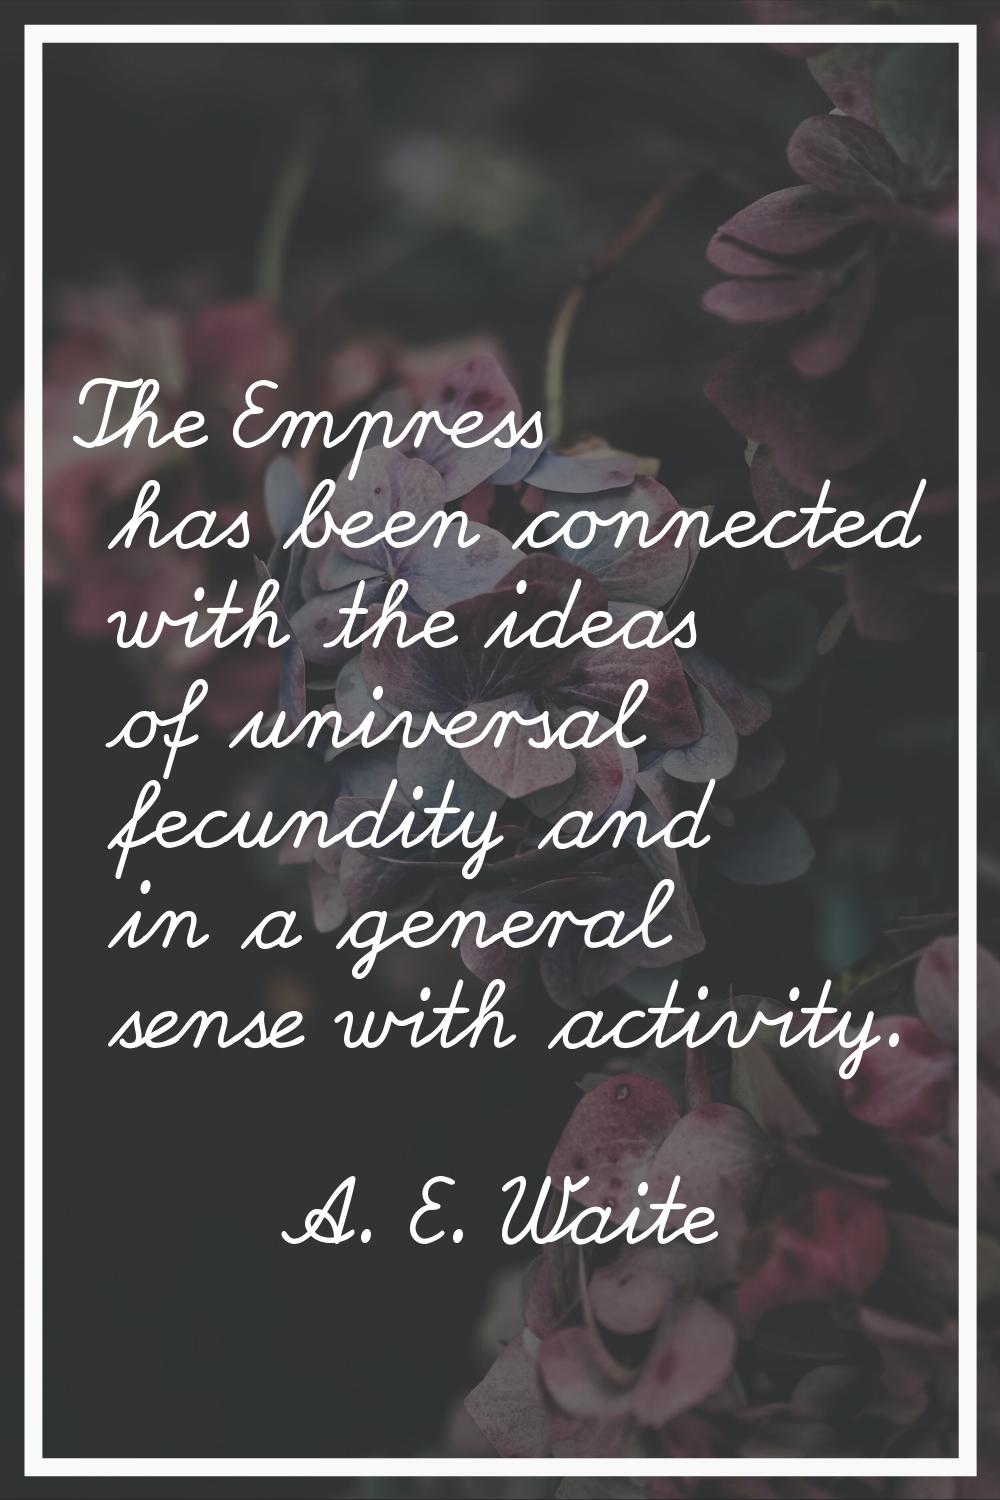 The Empress has been connected with the ideas of universal fecundity and in a general sense with ac